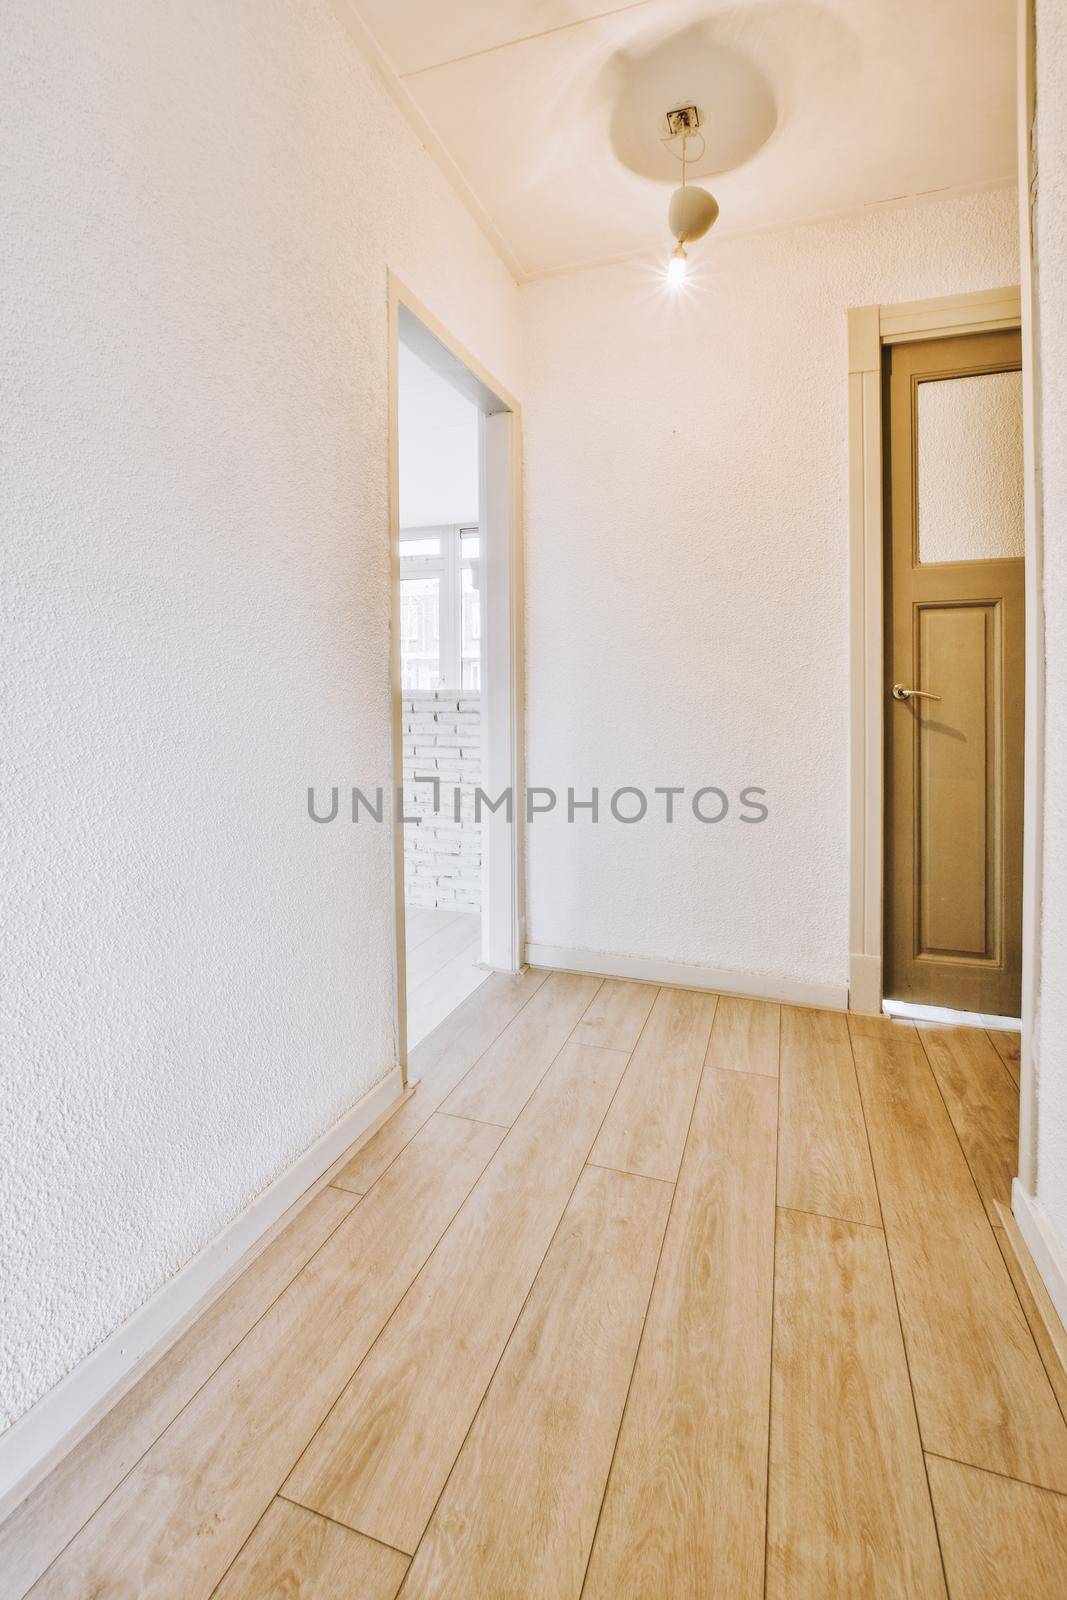 Interior of contemporary flat in minimal style with spacious hallway with white walls